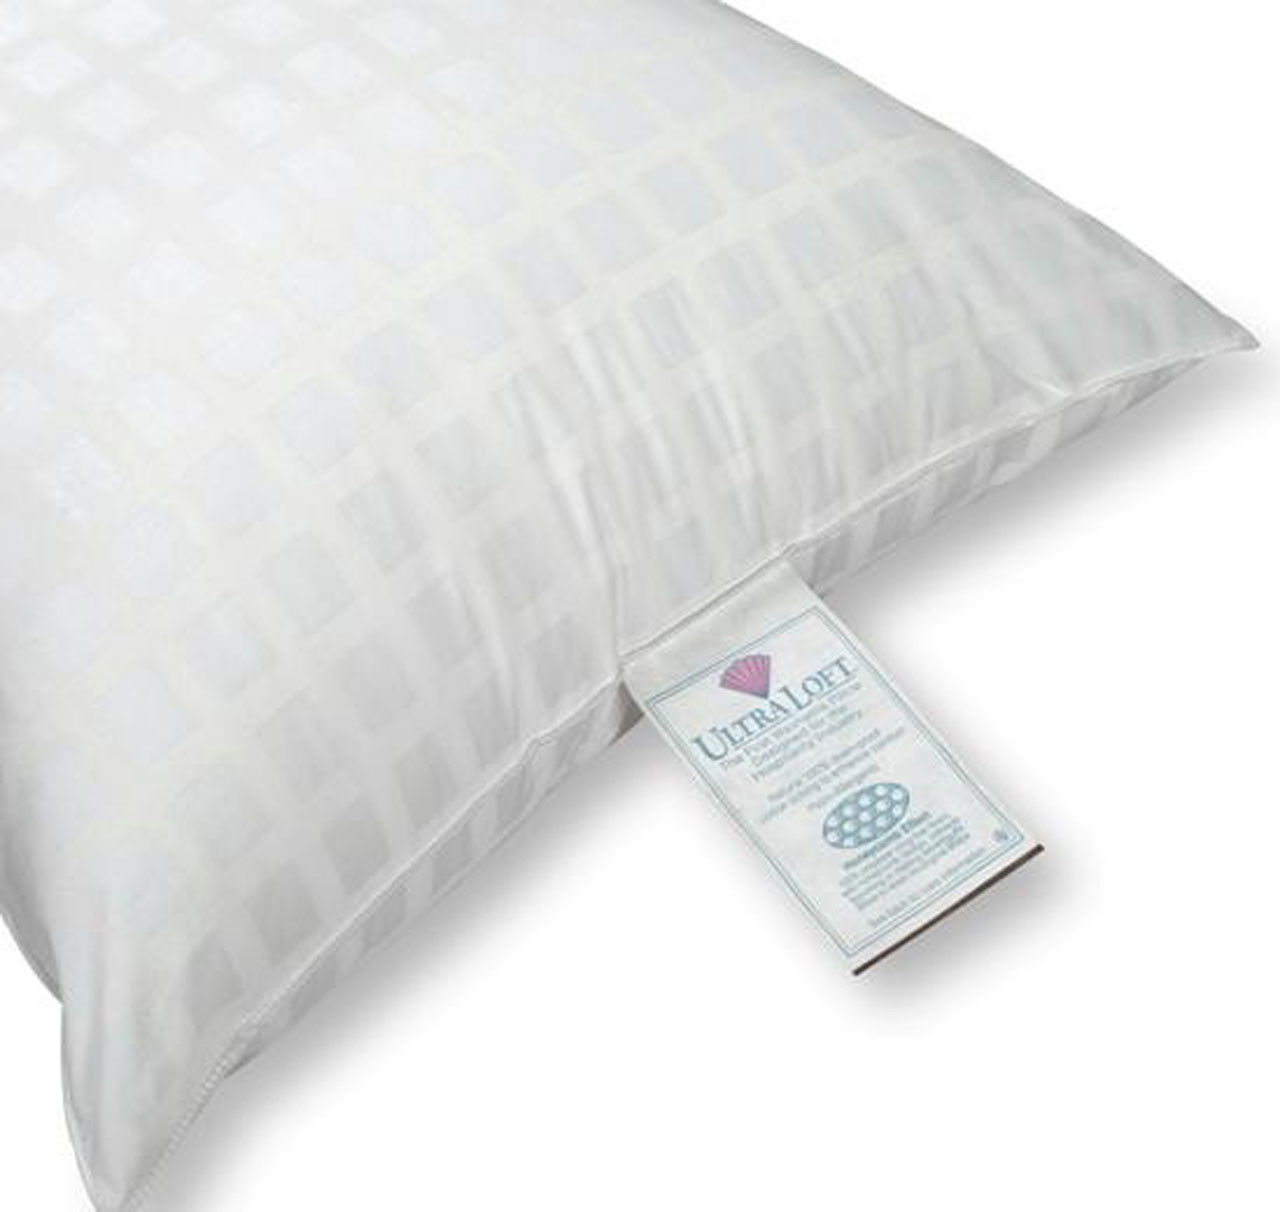 Can you describe the design of the ticking on the UltraLoft Pillow?